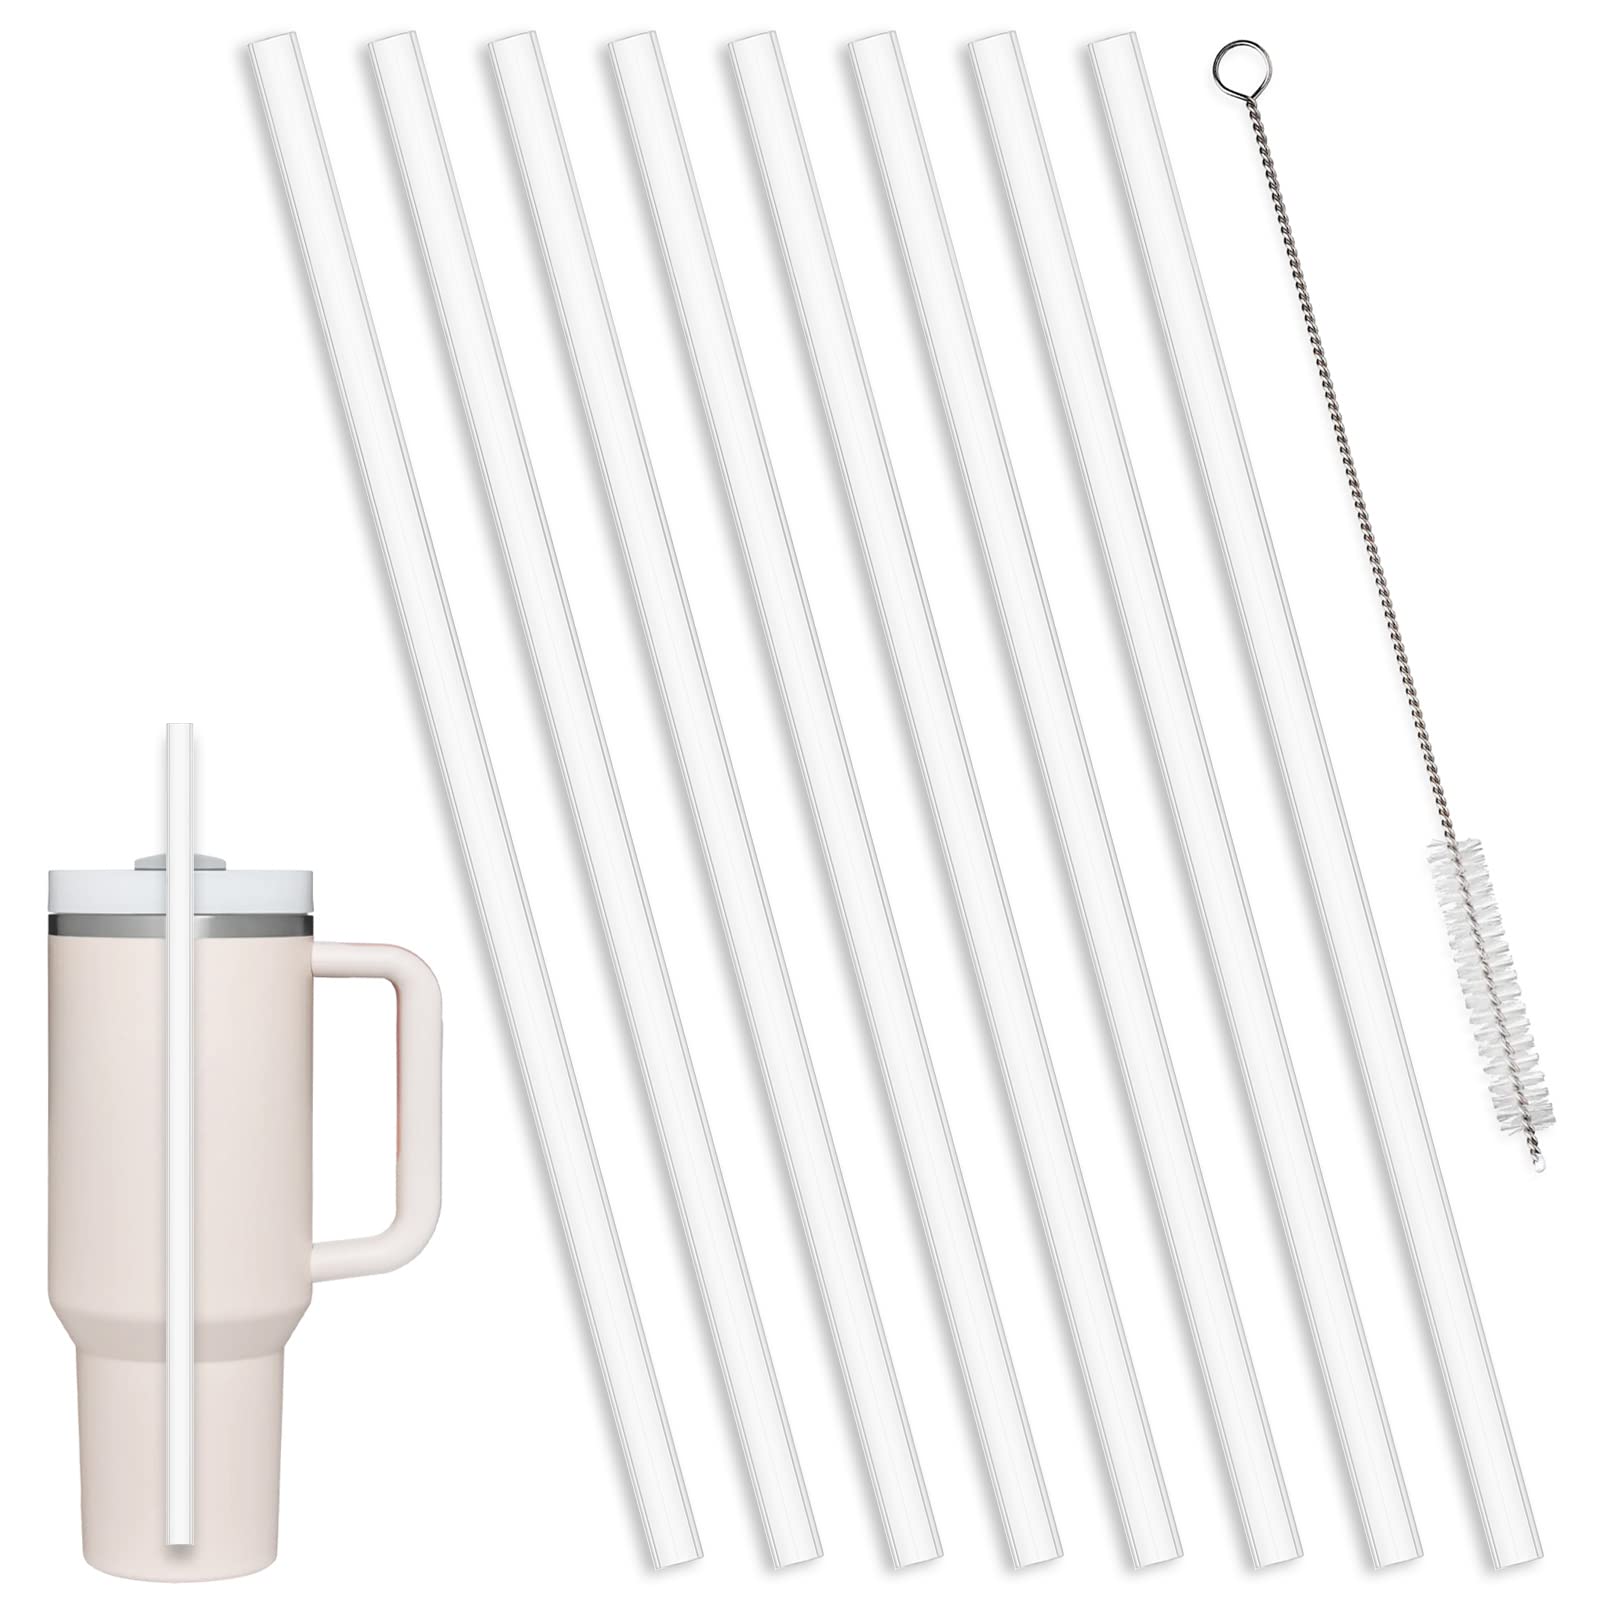 Replacement Straw Compatible with Stanley 40 oz 30 oz Cup Tumbler, 6 Pack Reusable Straw with Cleaning Brush, Plastic, Clear